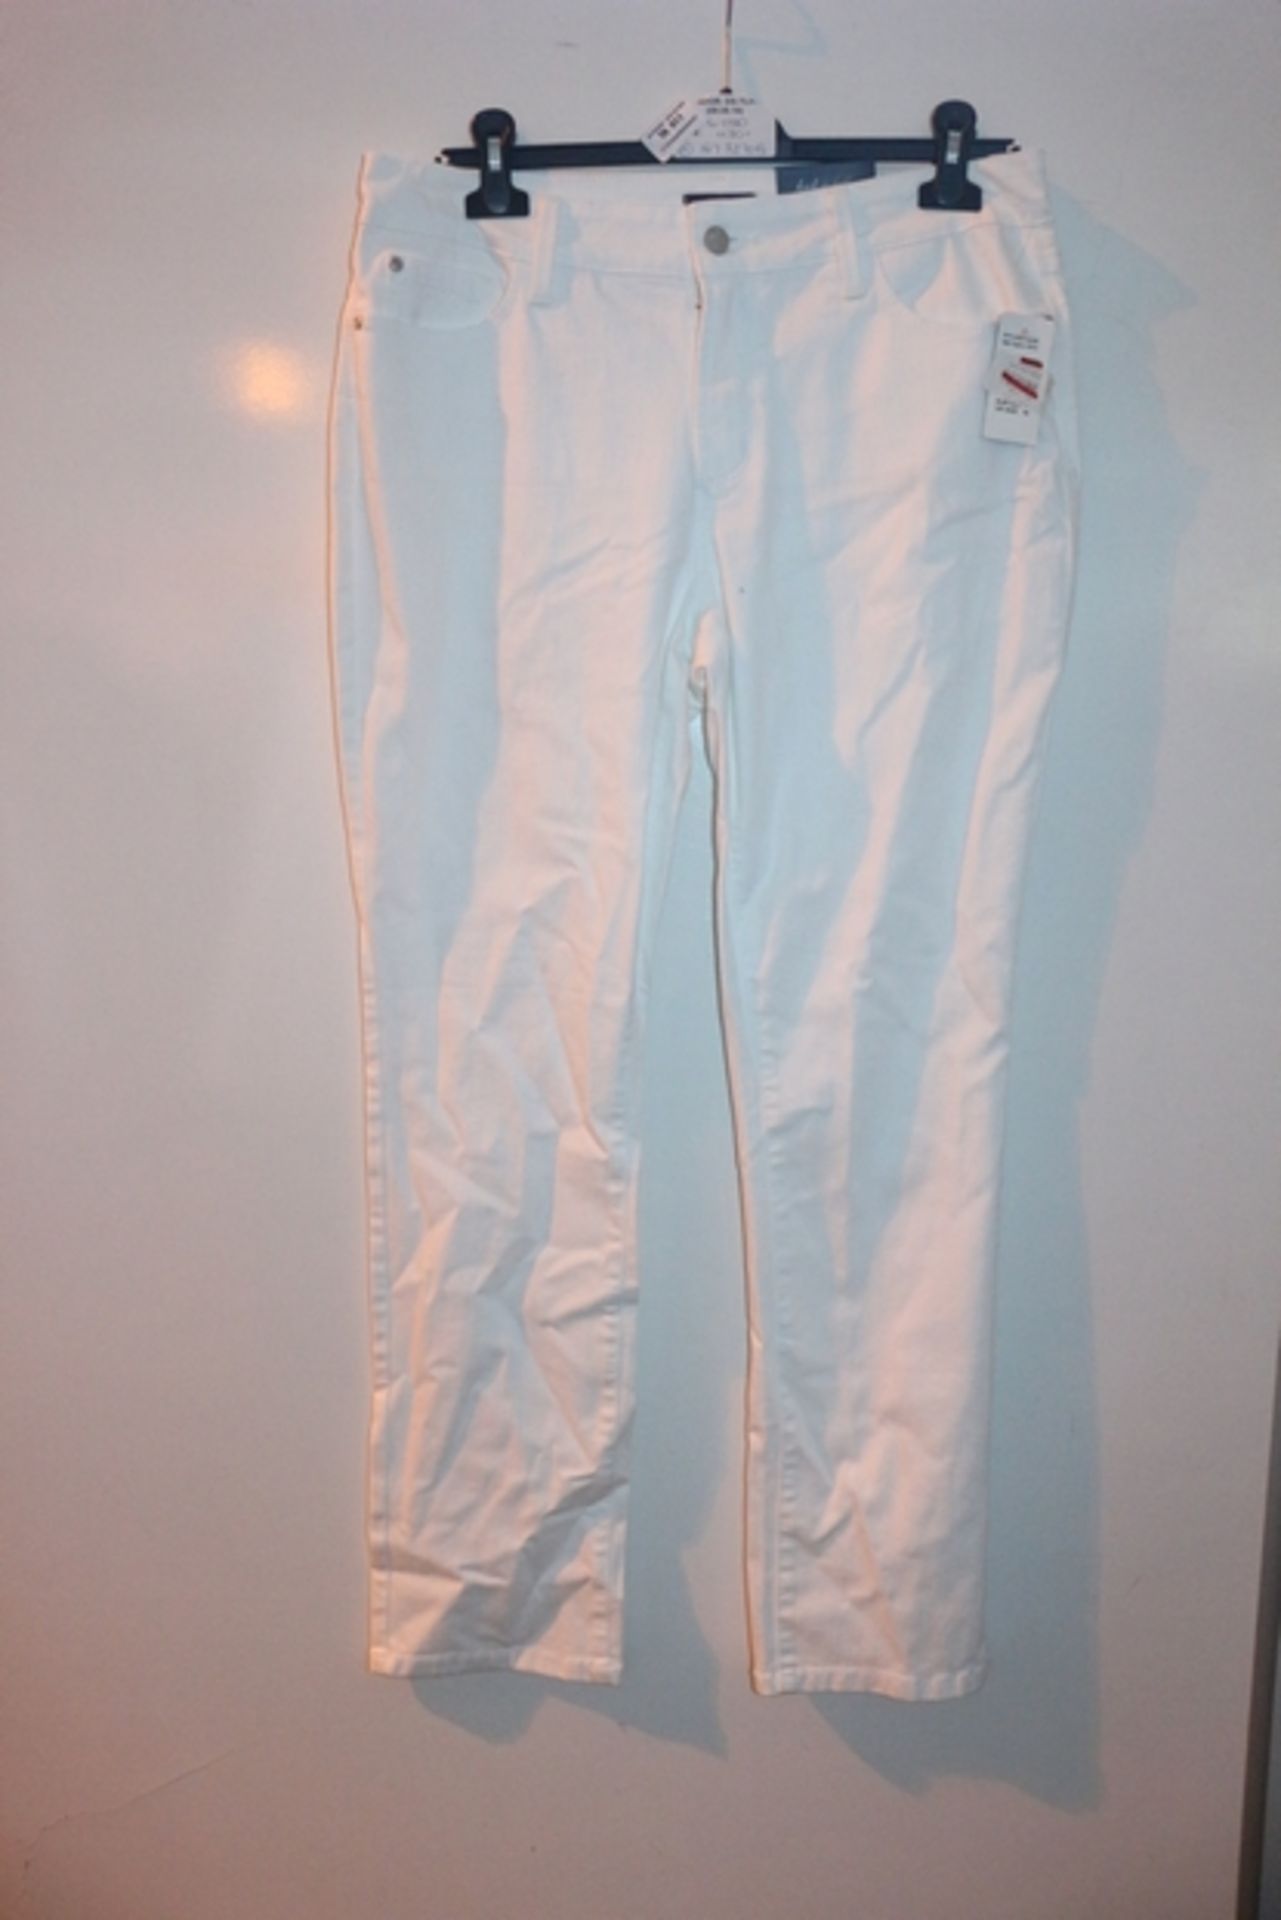 1X BRAND NEW PAIR OF NYJD TROUSERS SIZE 6 RRP £129.99 (DS-TLH-B) (6.080) (16732705)